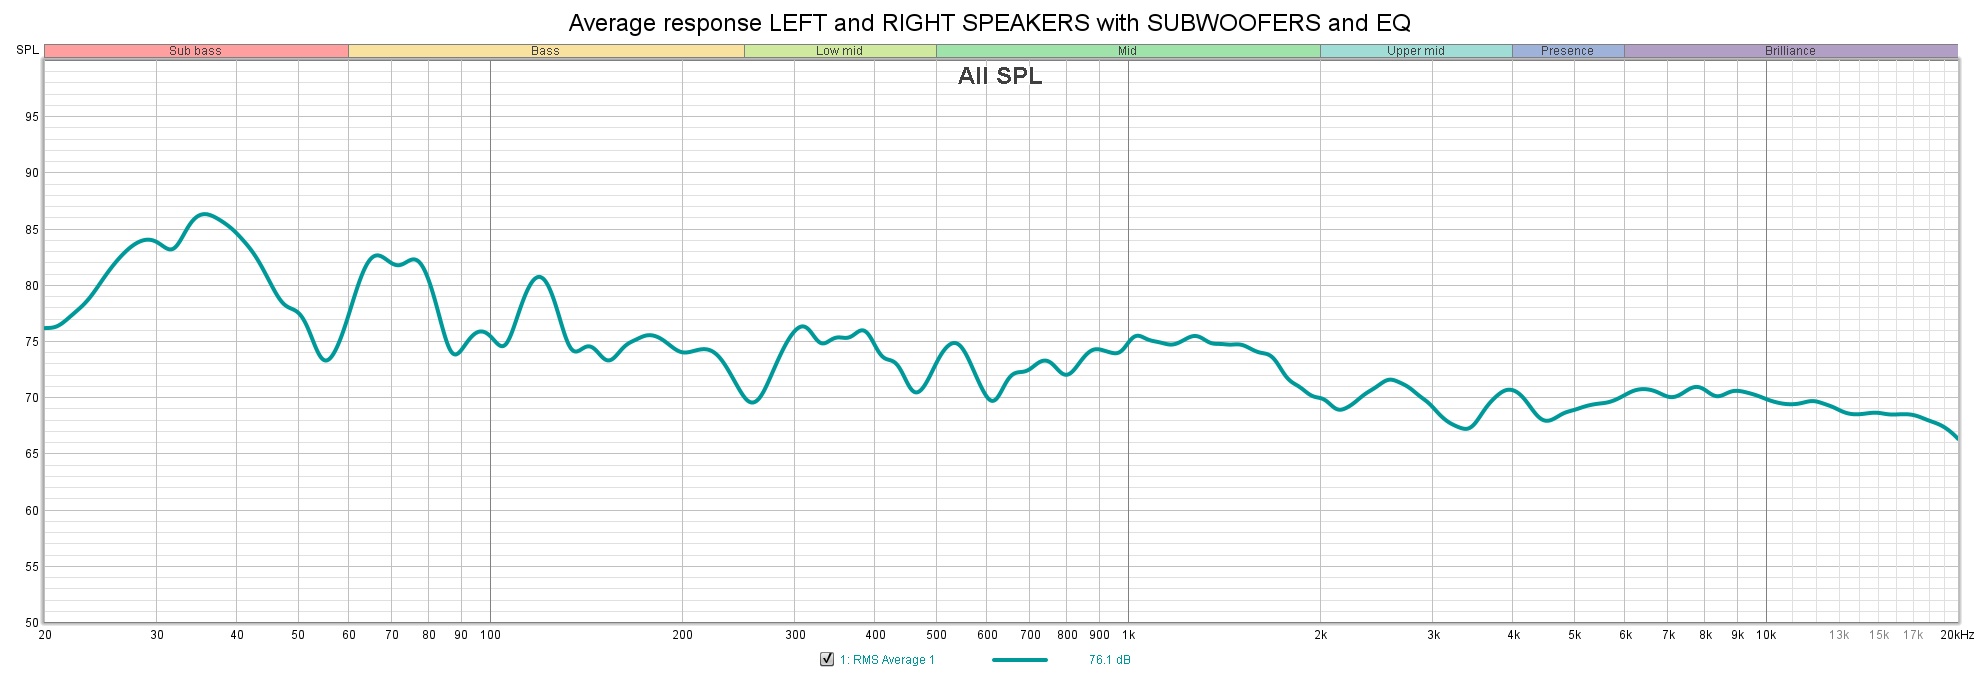 Average response LEFT and RIGHT SPEAKERS with SUBWOOFERS and EQ.jpg